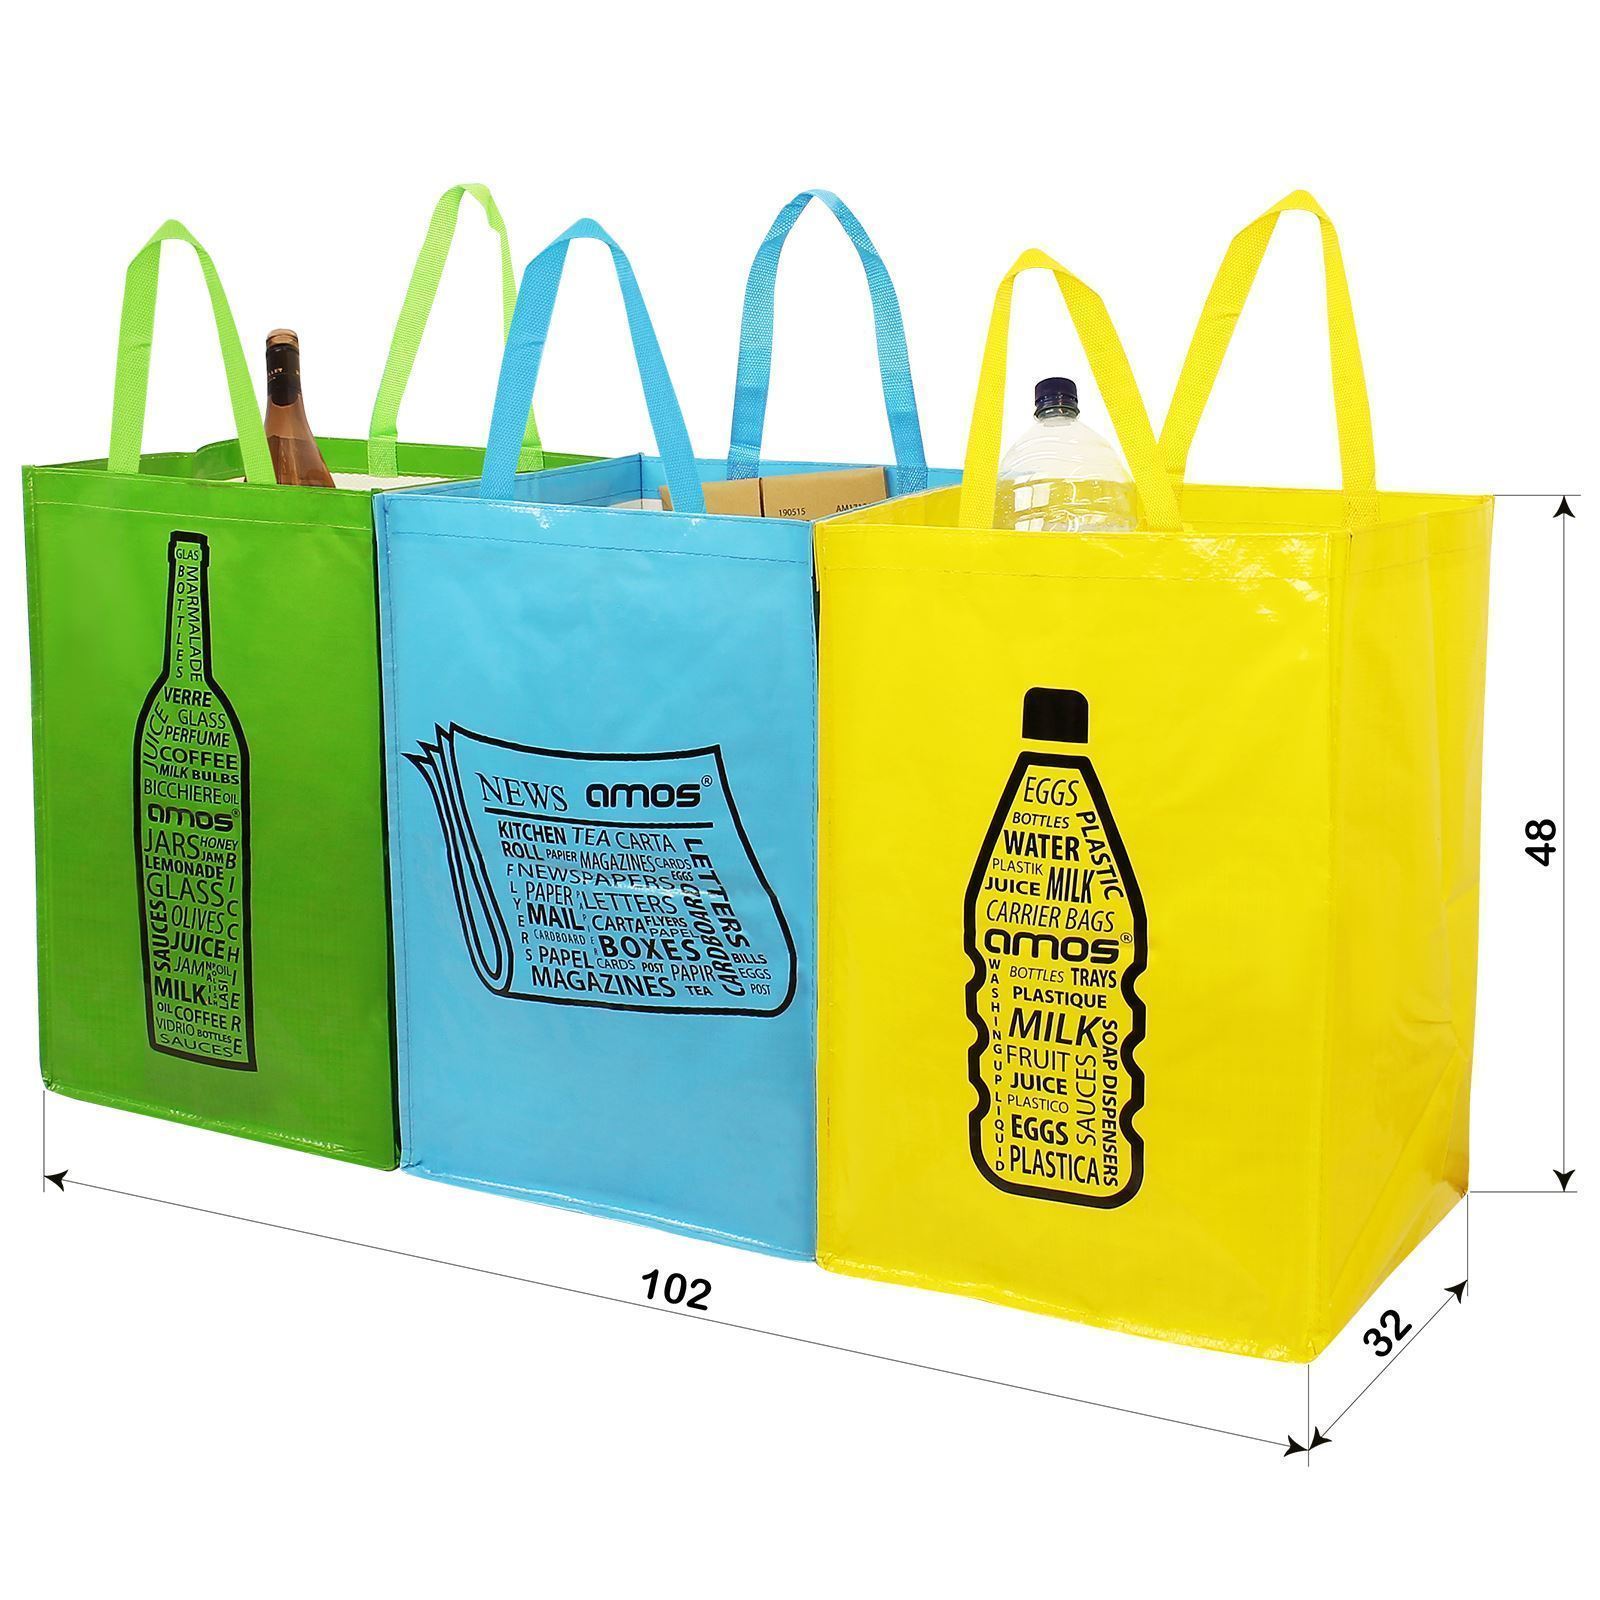 AMOS 3 x Recycling Bags